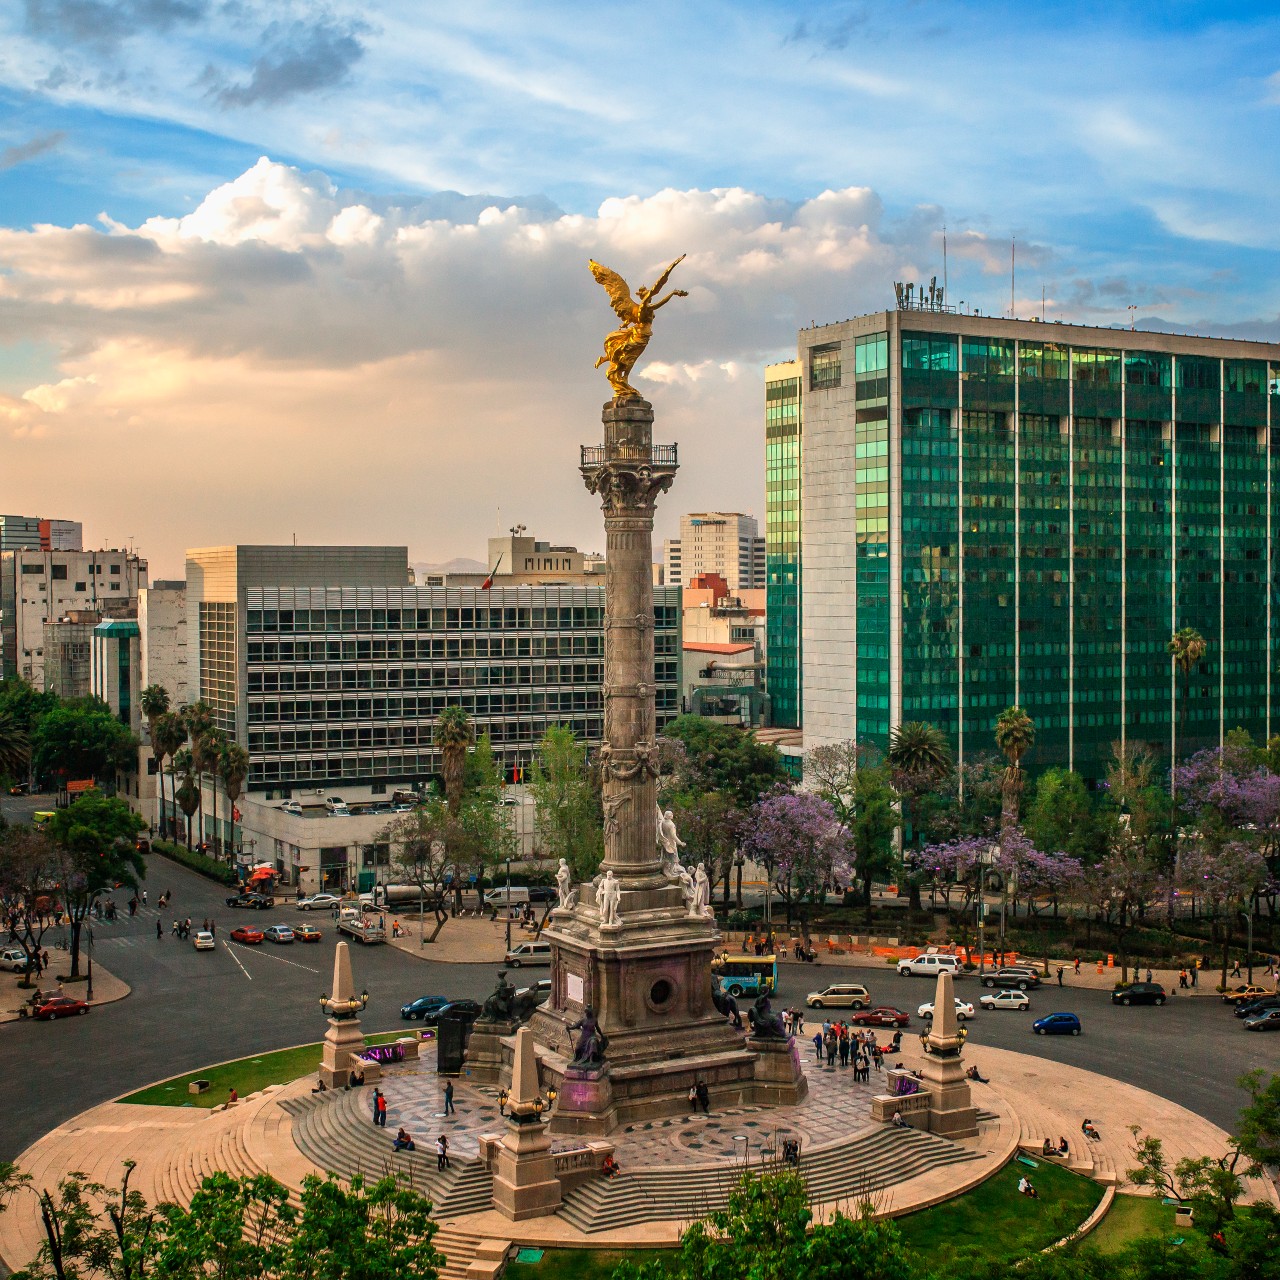 Top 25 Things to Do in Mexico City – Fodor's Travel Guide